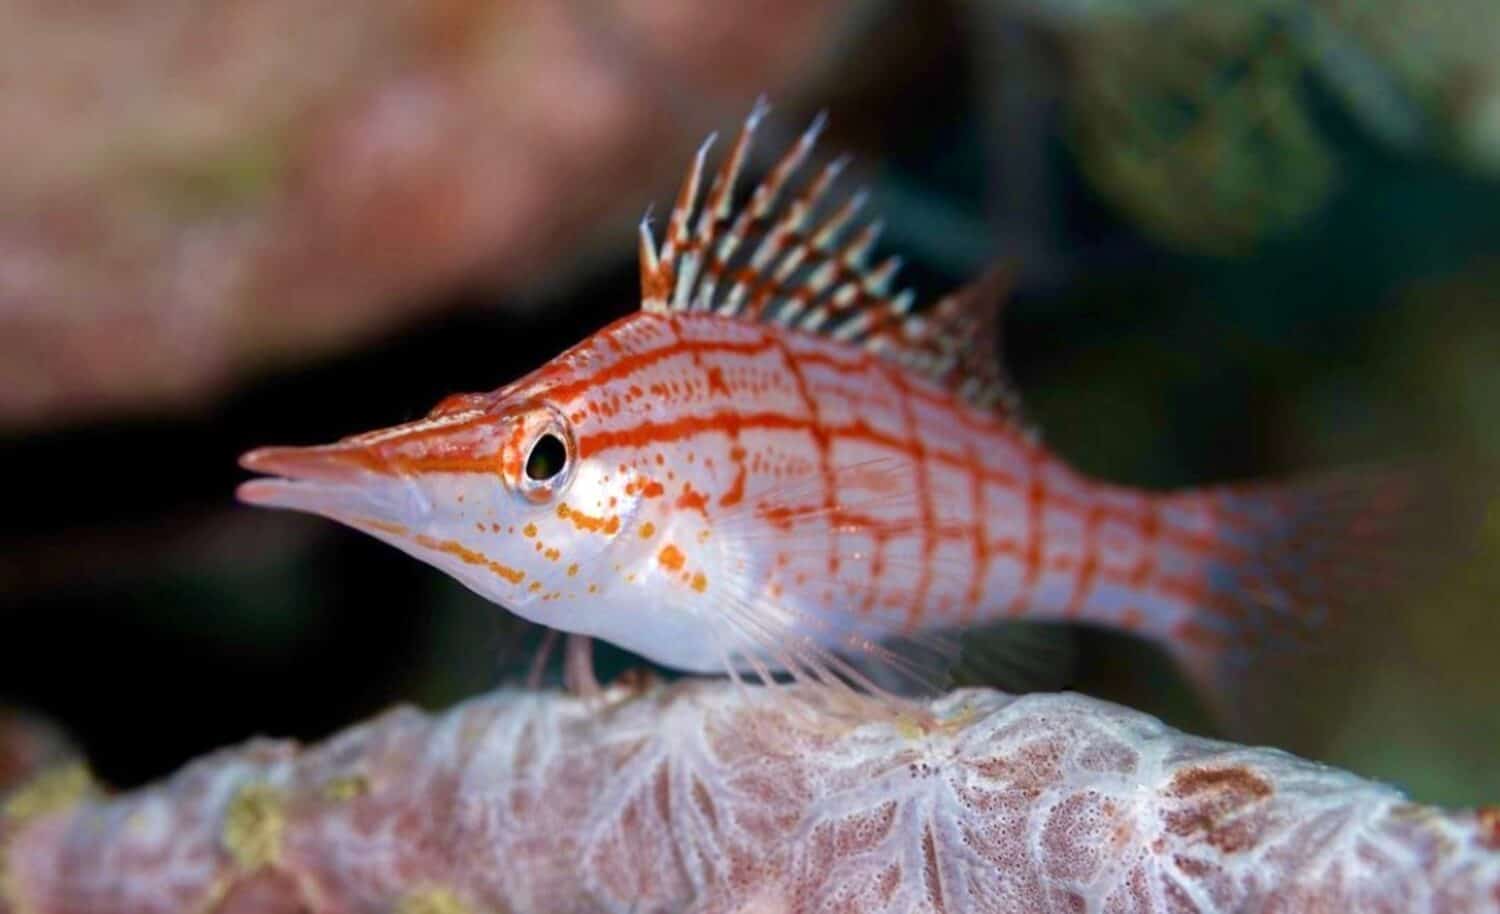 the accompanying longnose hawkfish is hiding on the coral reef